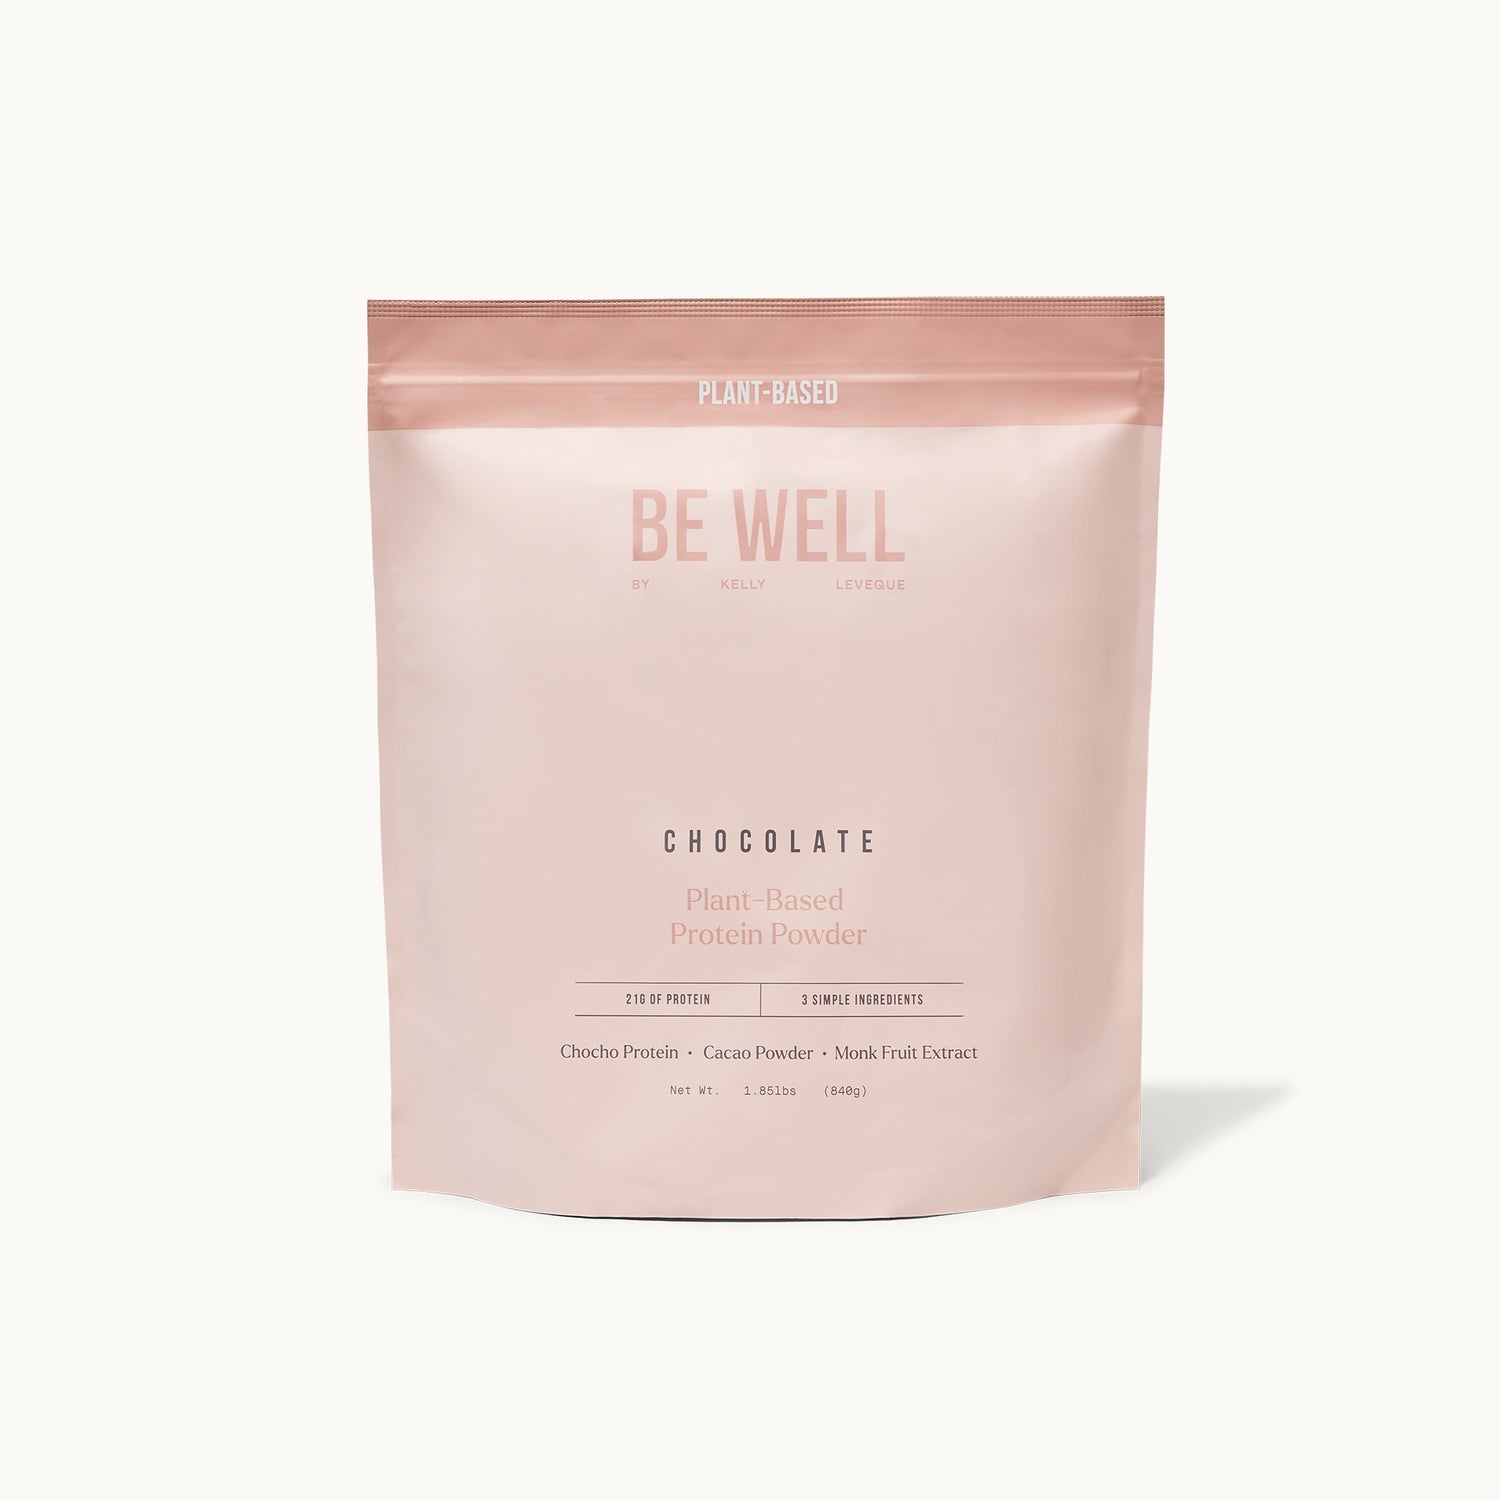 Be Well by Kelly